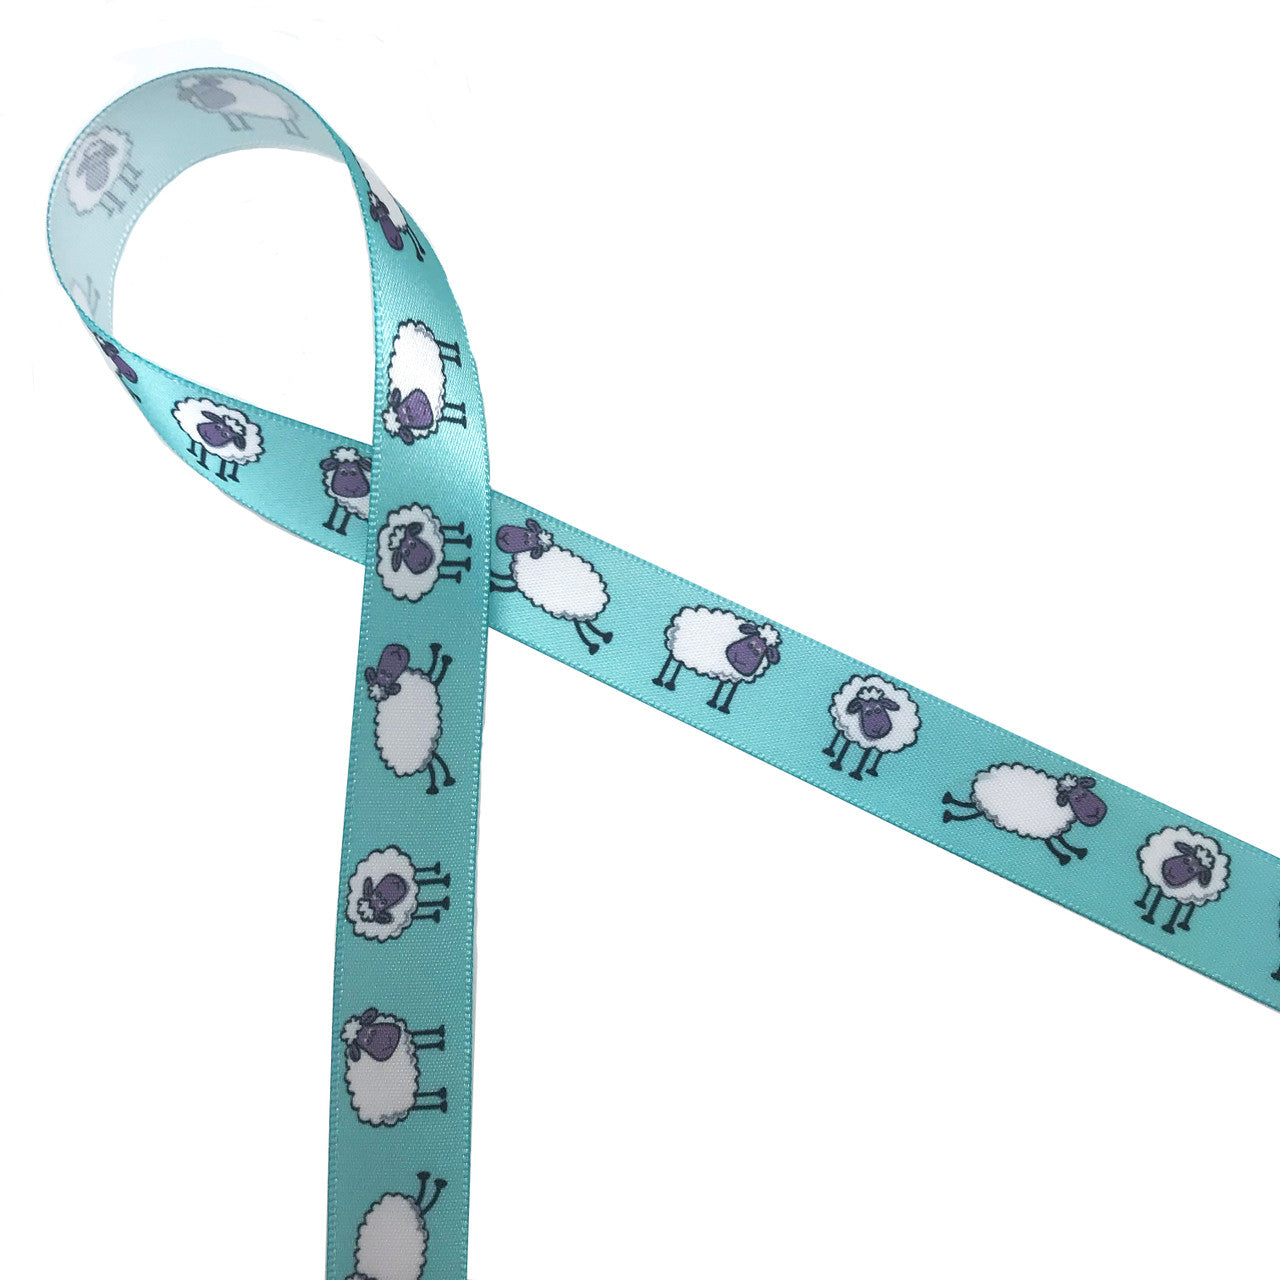 Sheep Ribbon in black and white on a teal blue background printed on 5/8" white single face satin